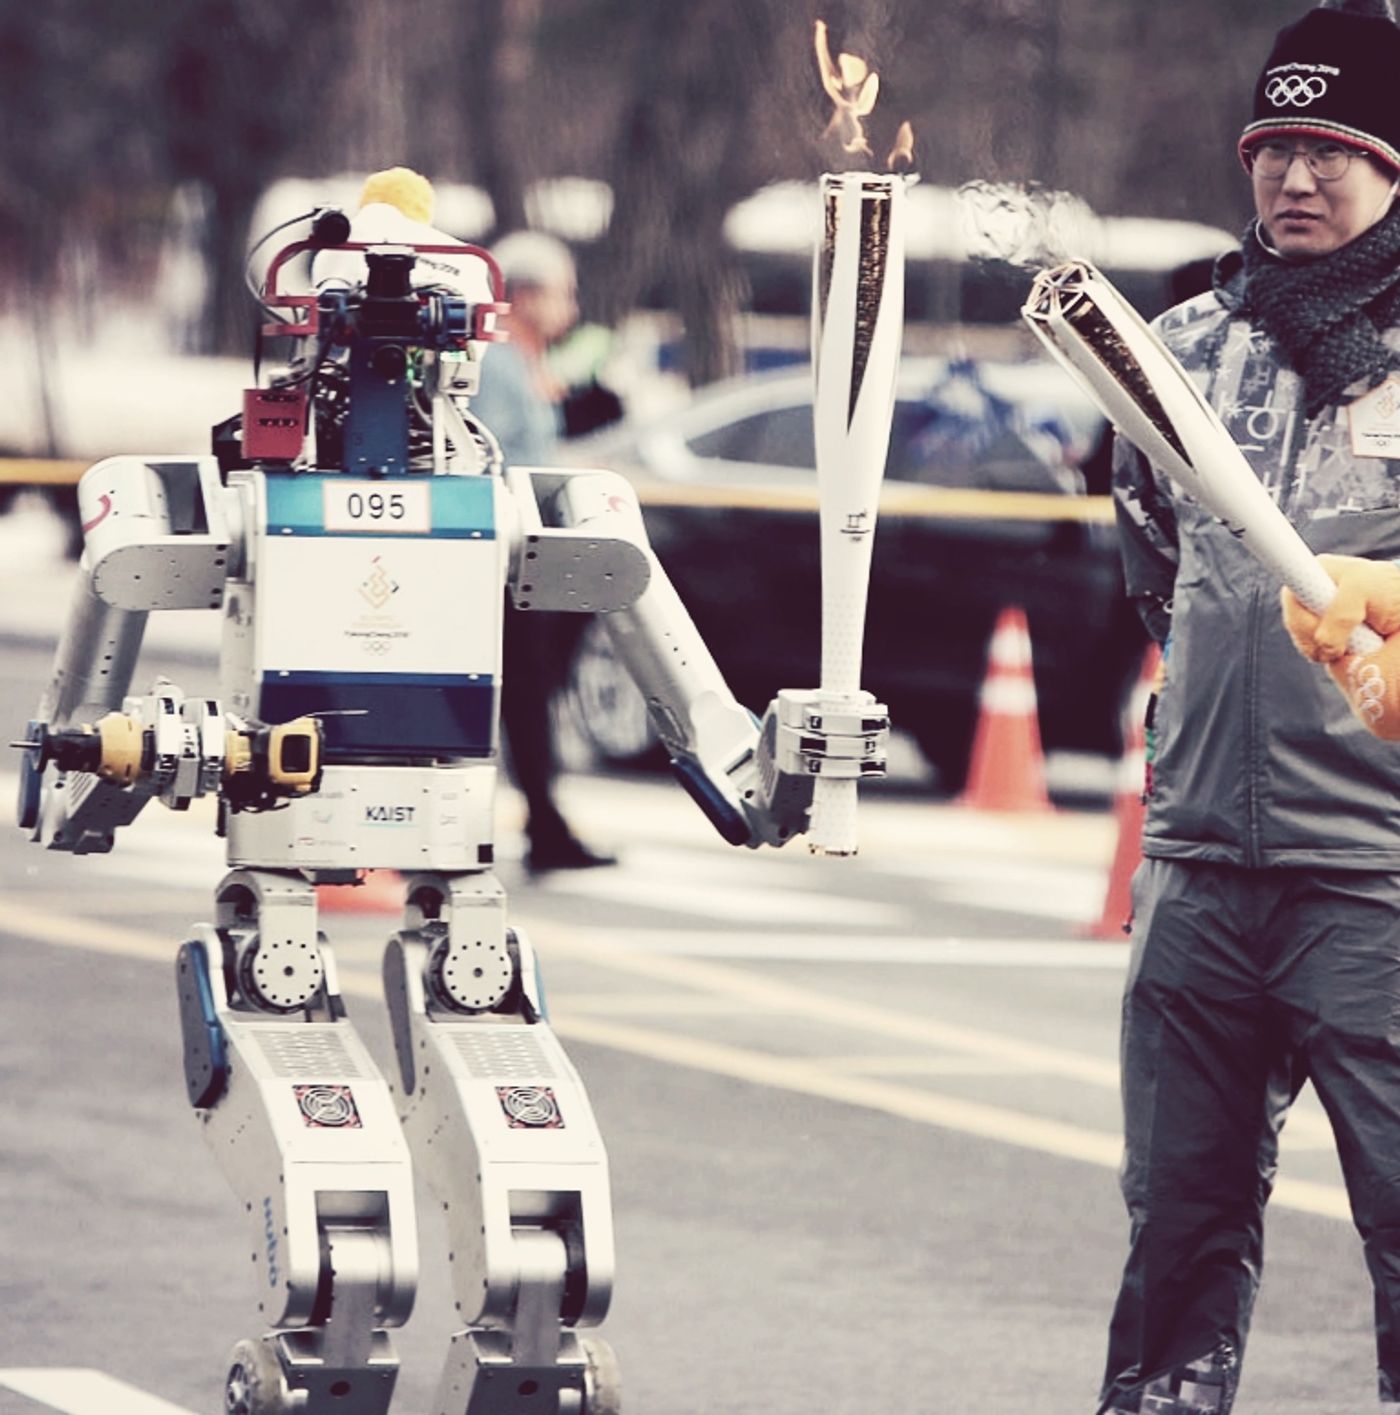 HUBO the robot receives the Olympic flame, credit: still from On Demand News, YouTube